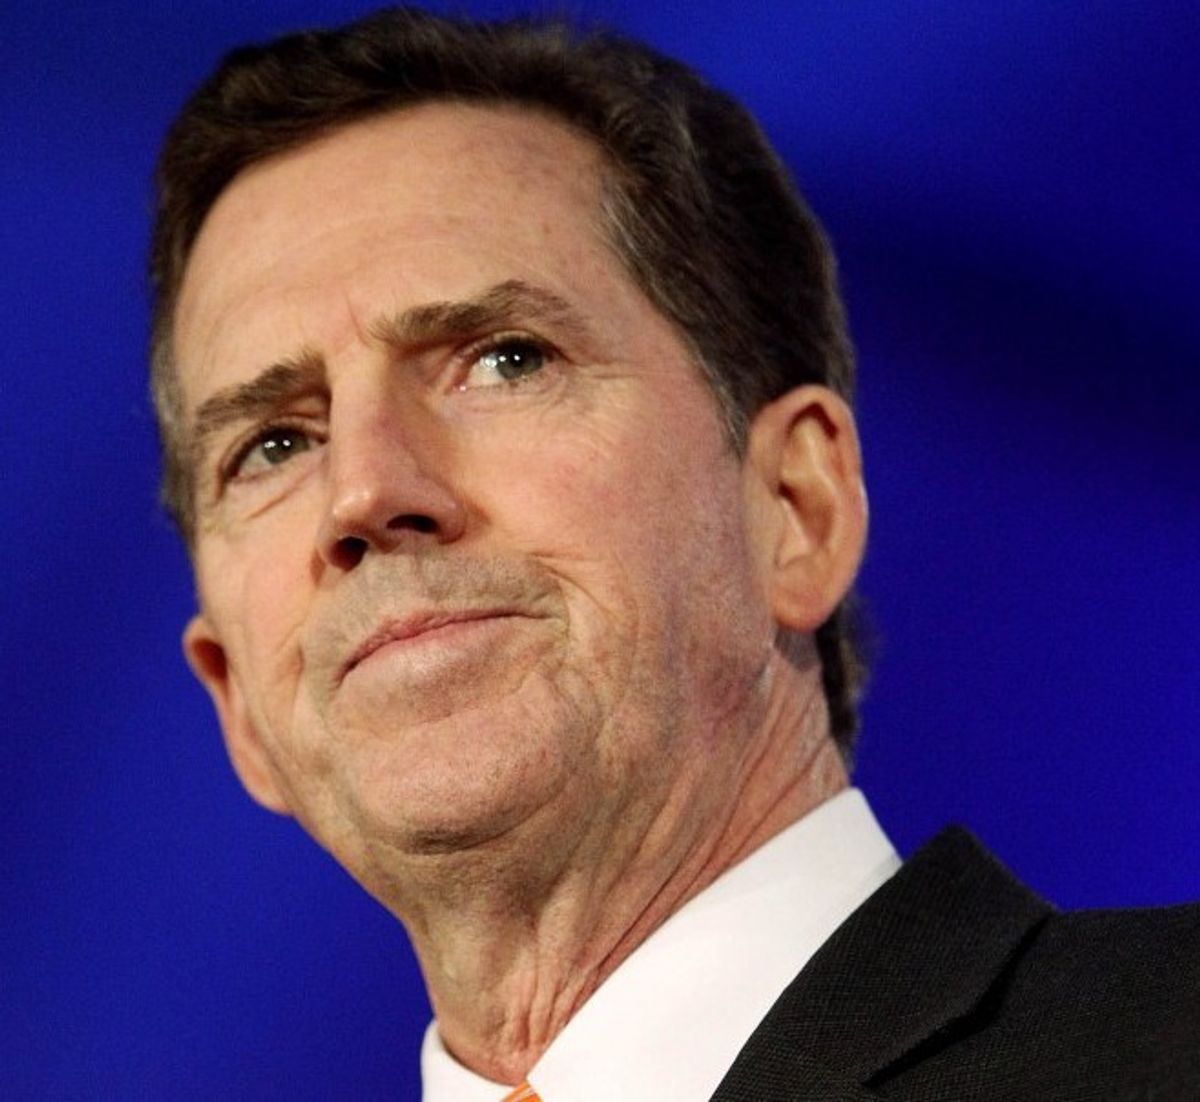 FILE - In this June 17, 2011 file photo, Sen. Jim DeMint, R-S.C. speaks in New Orleans. DeMint announced Thursday, Dec. 6, 2012  that he is resigning to take over at Heritage Foundation. (AP Photo/Patrick Semansky, File)              (Associated Press)